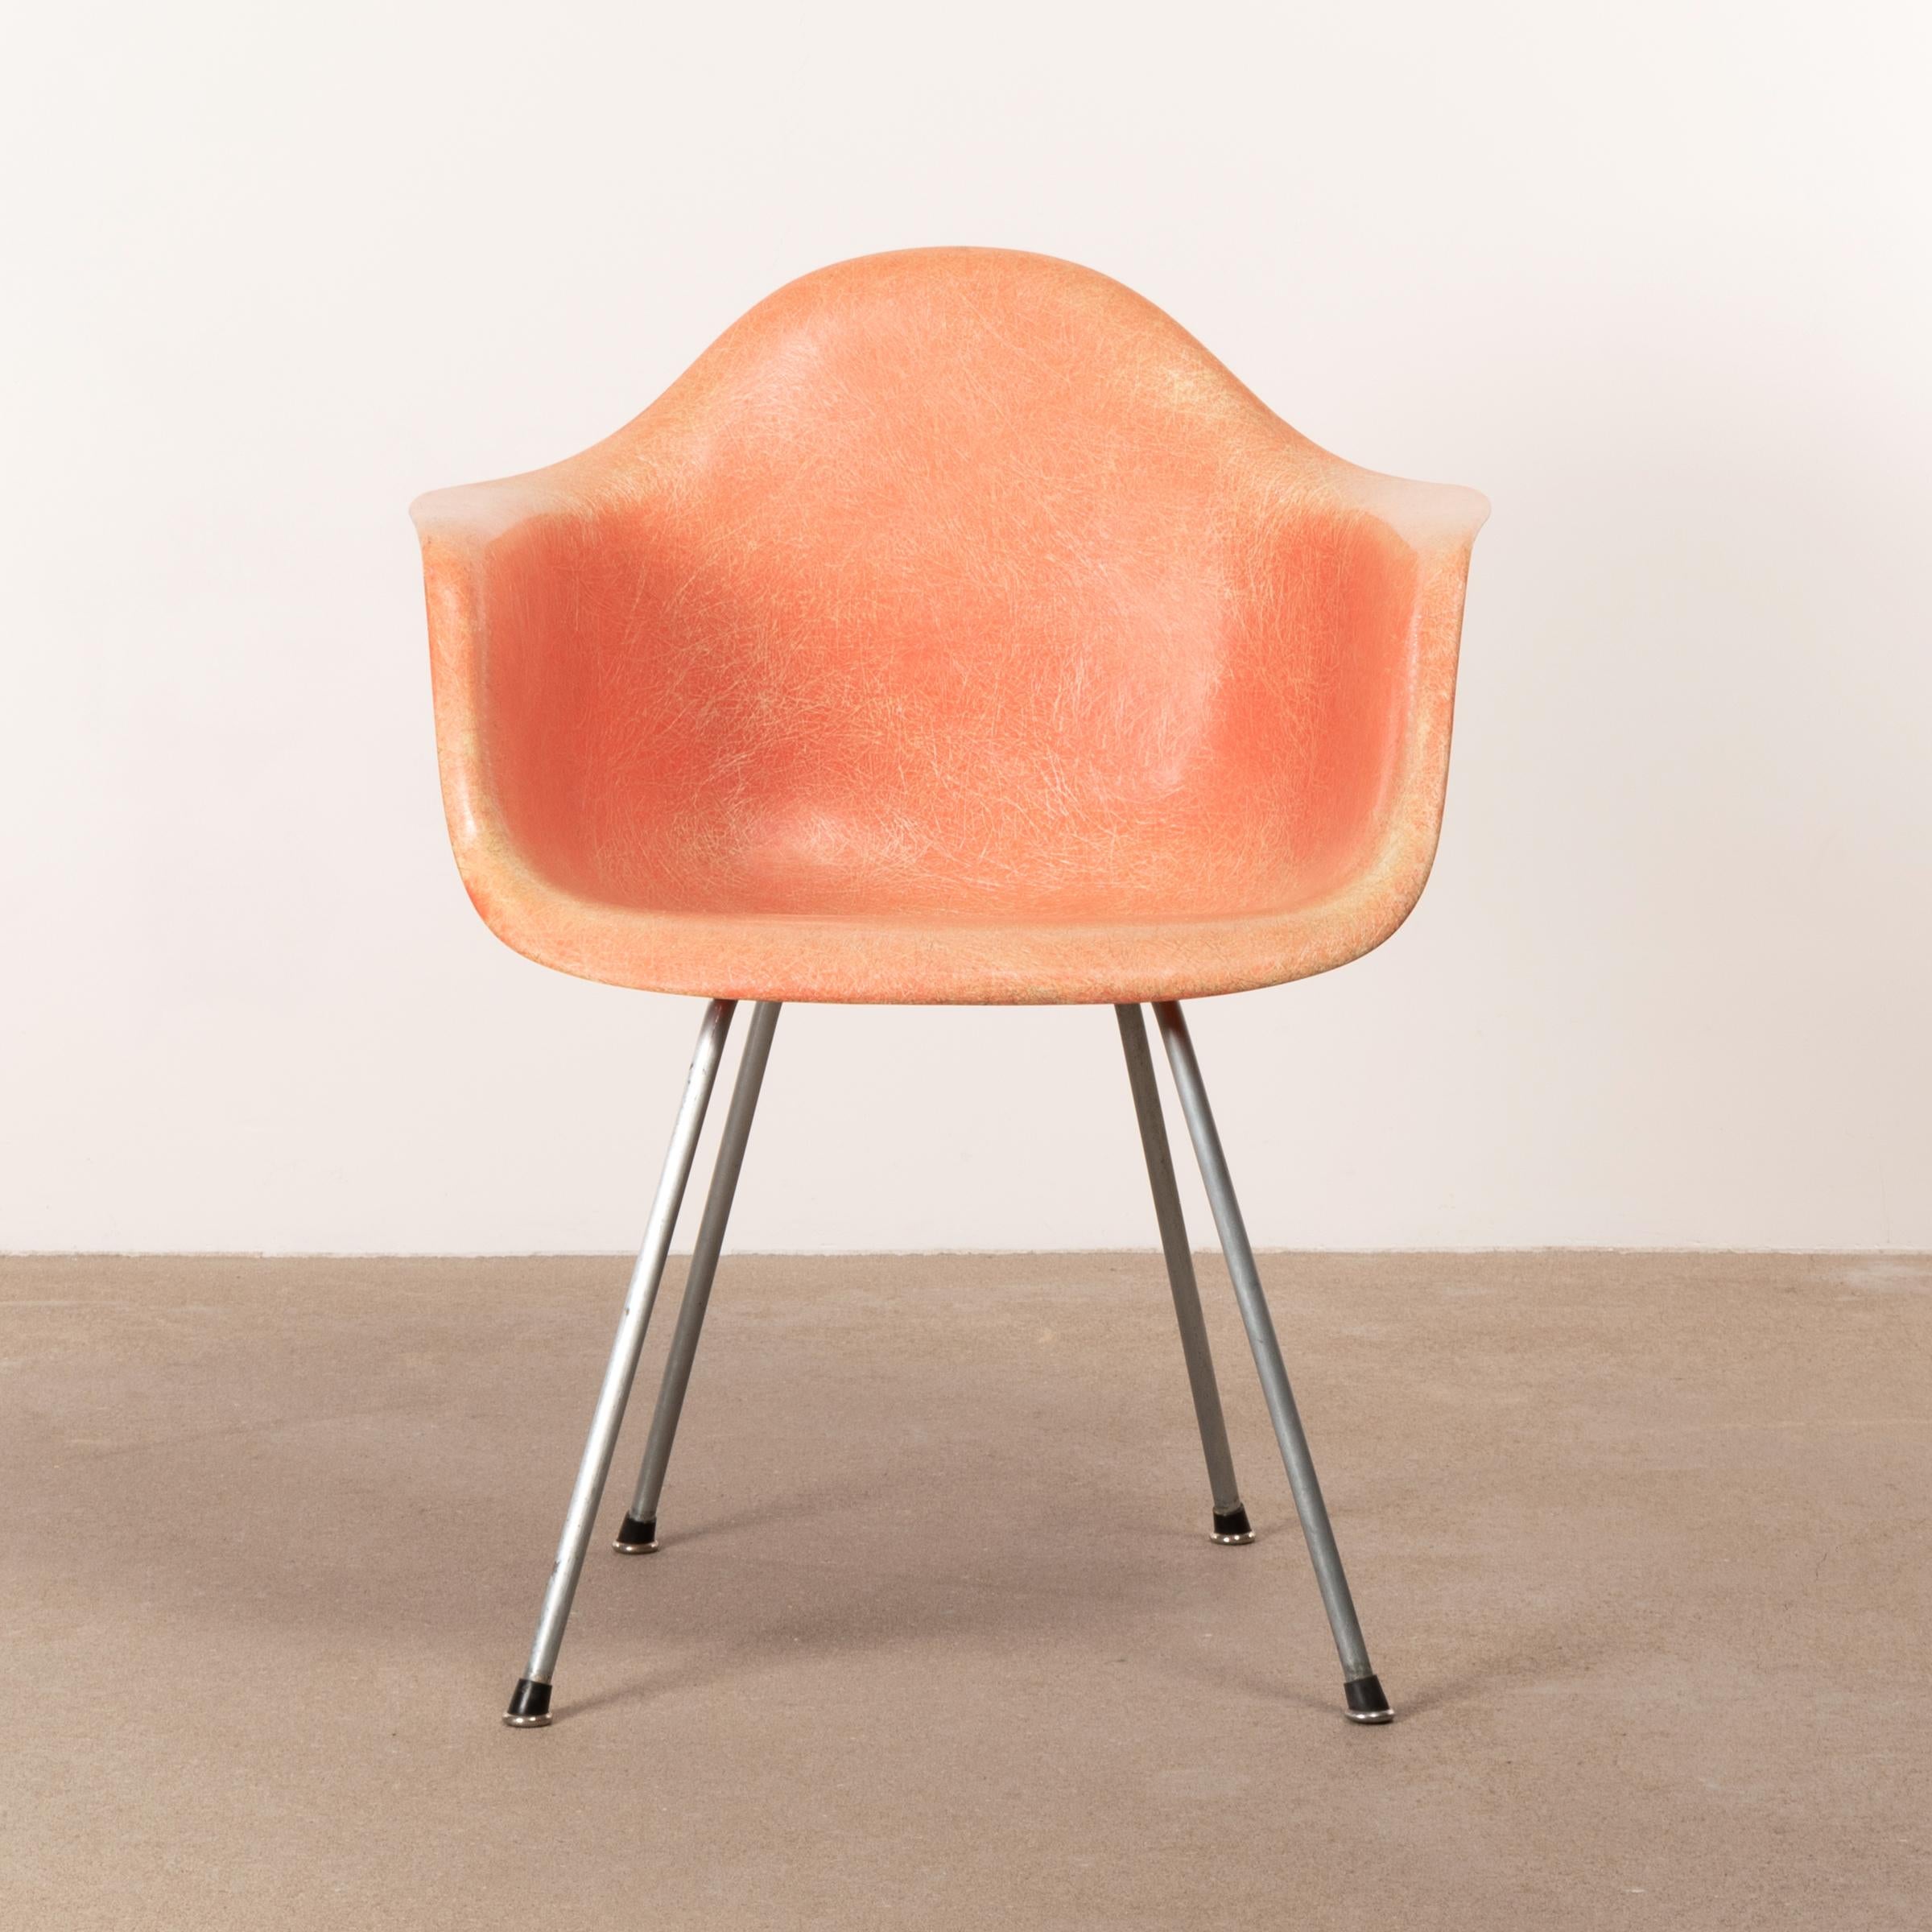 Iconic Dax chair in salmon color. Chair is in good condition with only light traces of use. First generation Zenith Plastics production with rope edge. Signed with 'checkerboard label'.